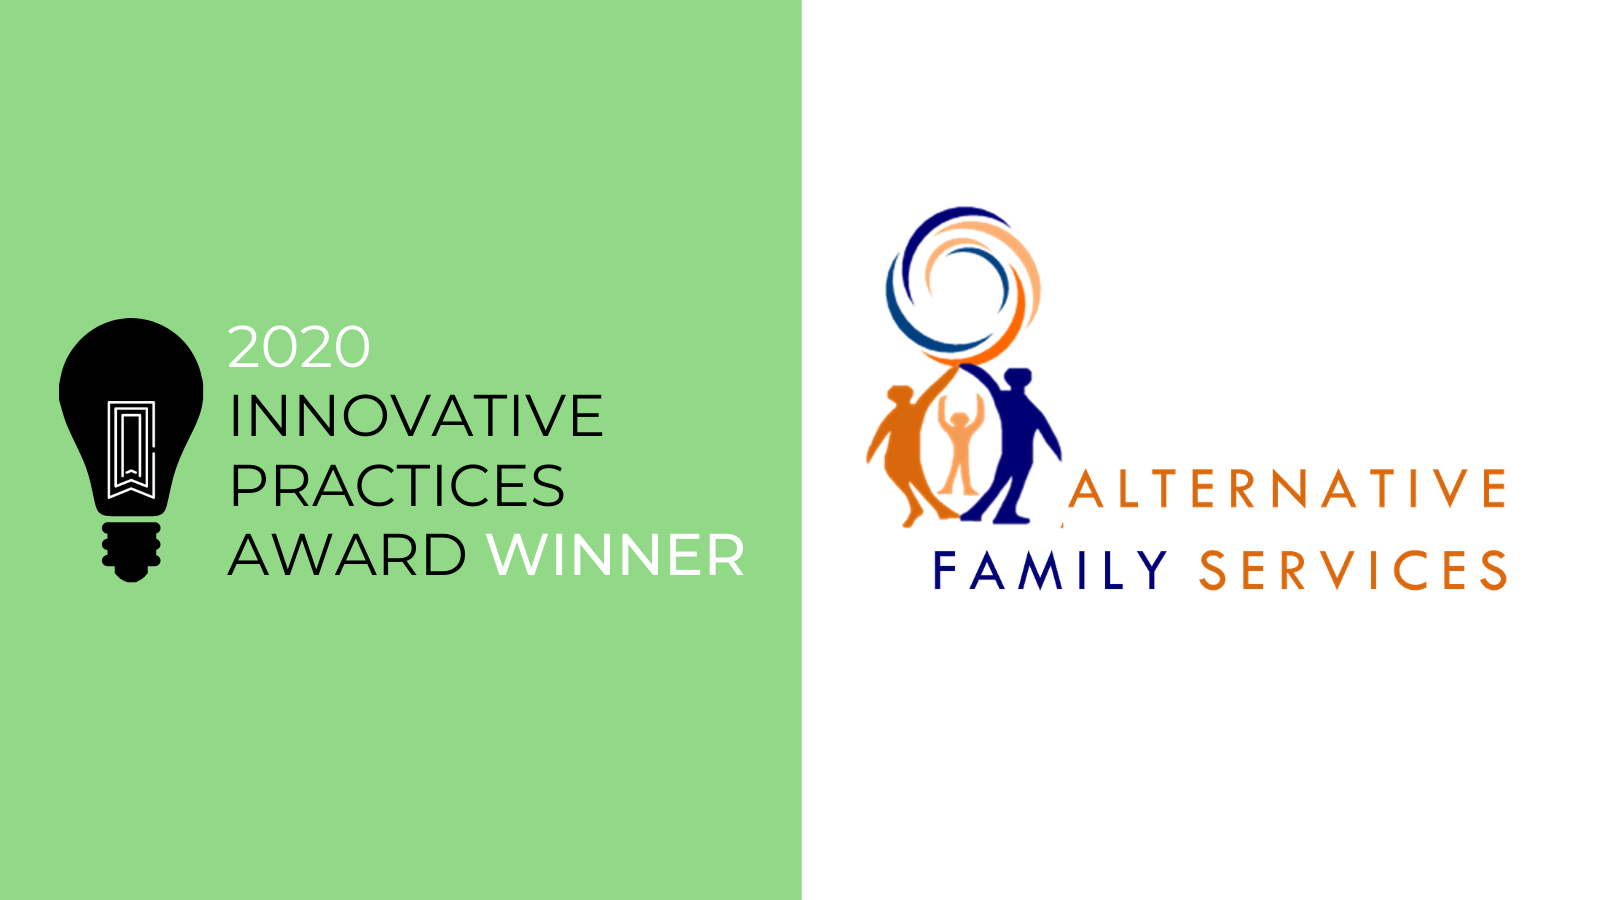 2020 Innovative Practices Award Winner and Alternative Family Services